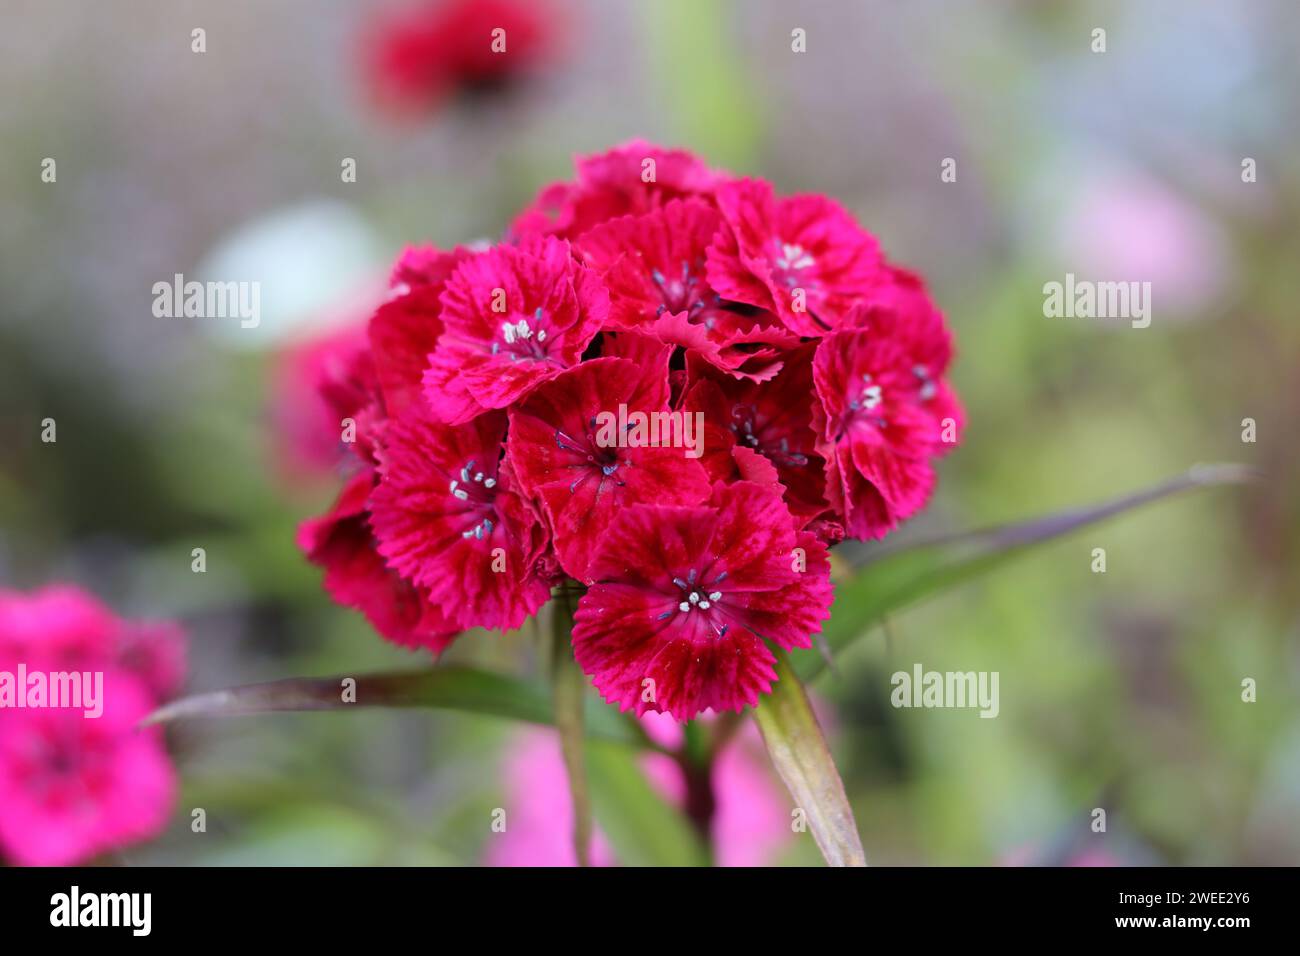 Single red dianthus or sweet william flower Stock Photo